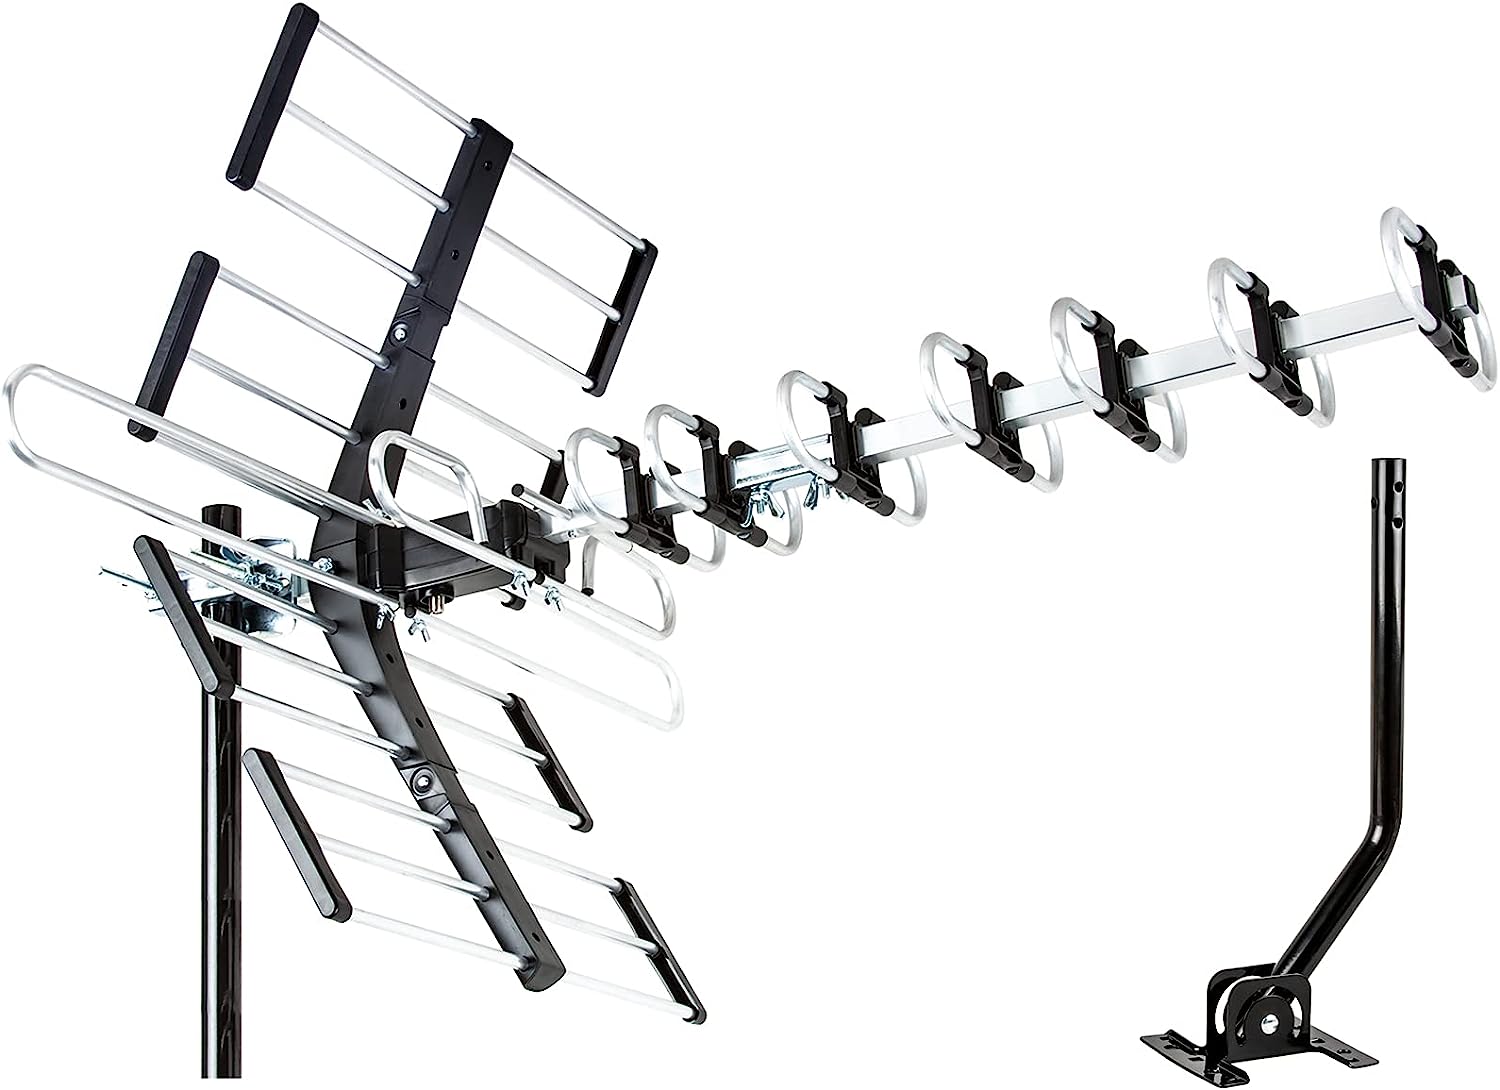 [Newest 2021] Five Star Outdoor HDTV Antenna up to 200 [...]